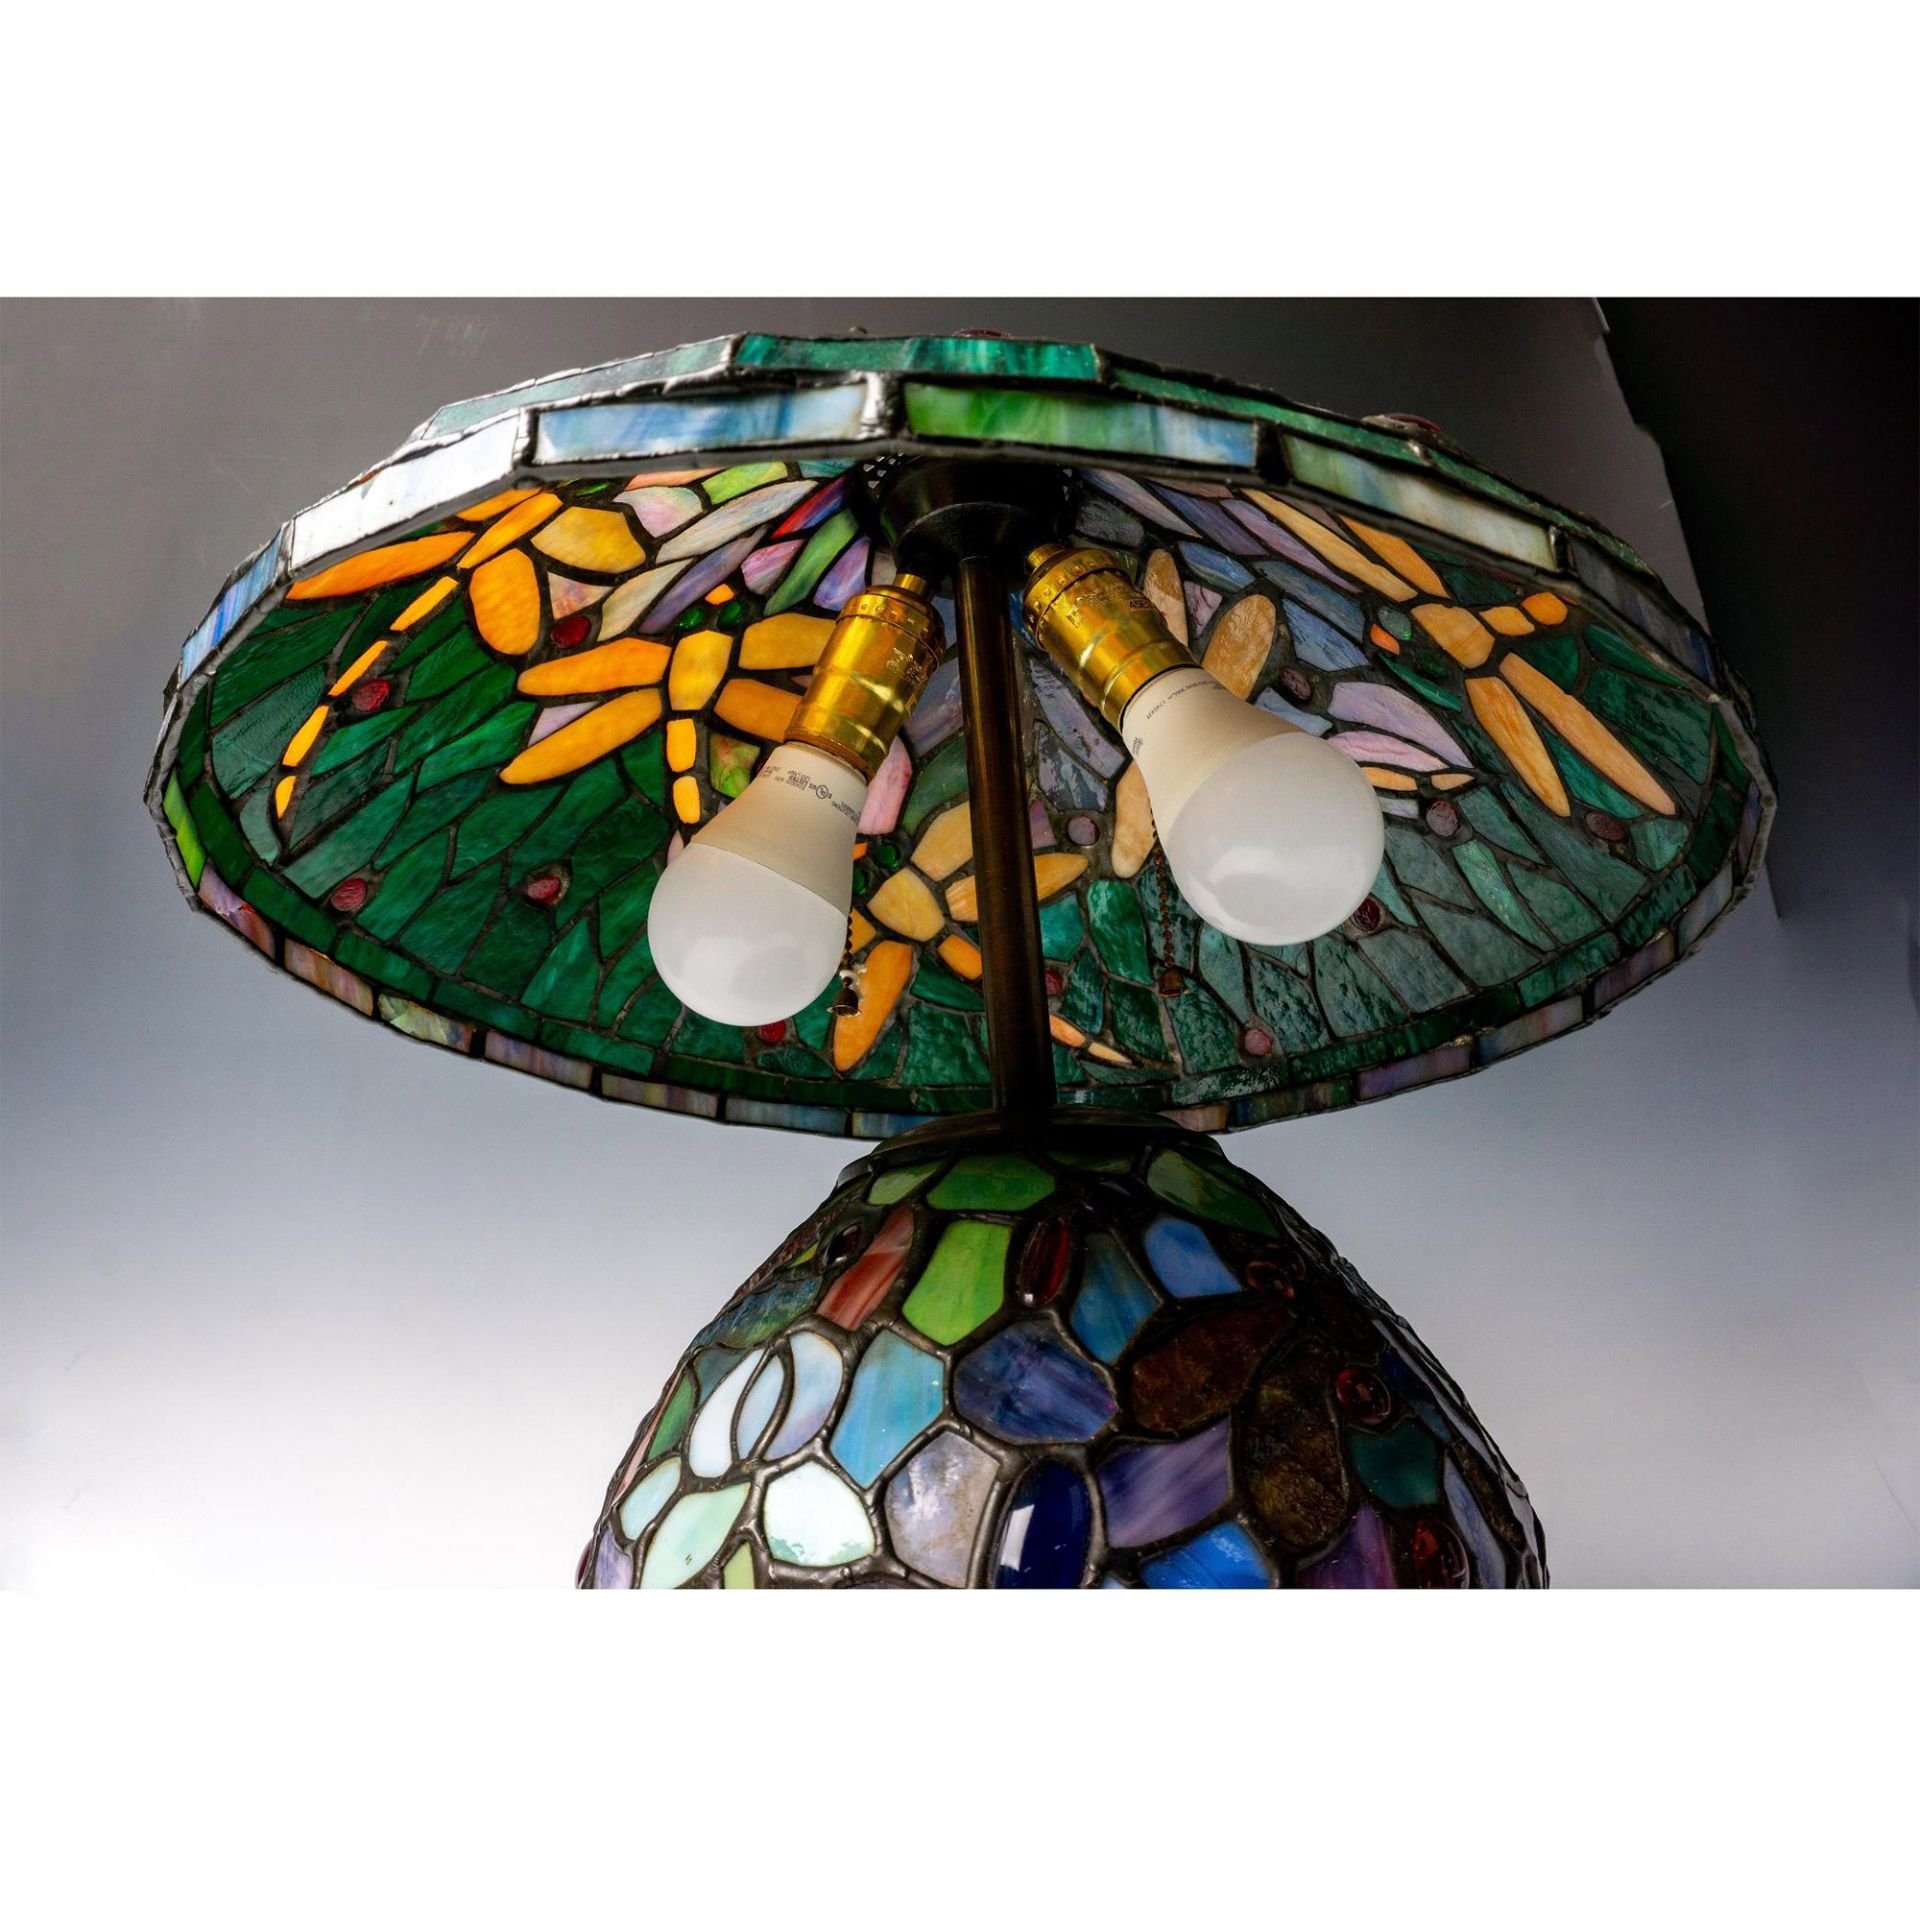 Tiffany Style-Stained Glass Dragonfly Lamp & Shade - Image 5 of 5